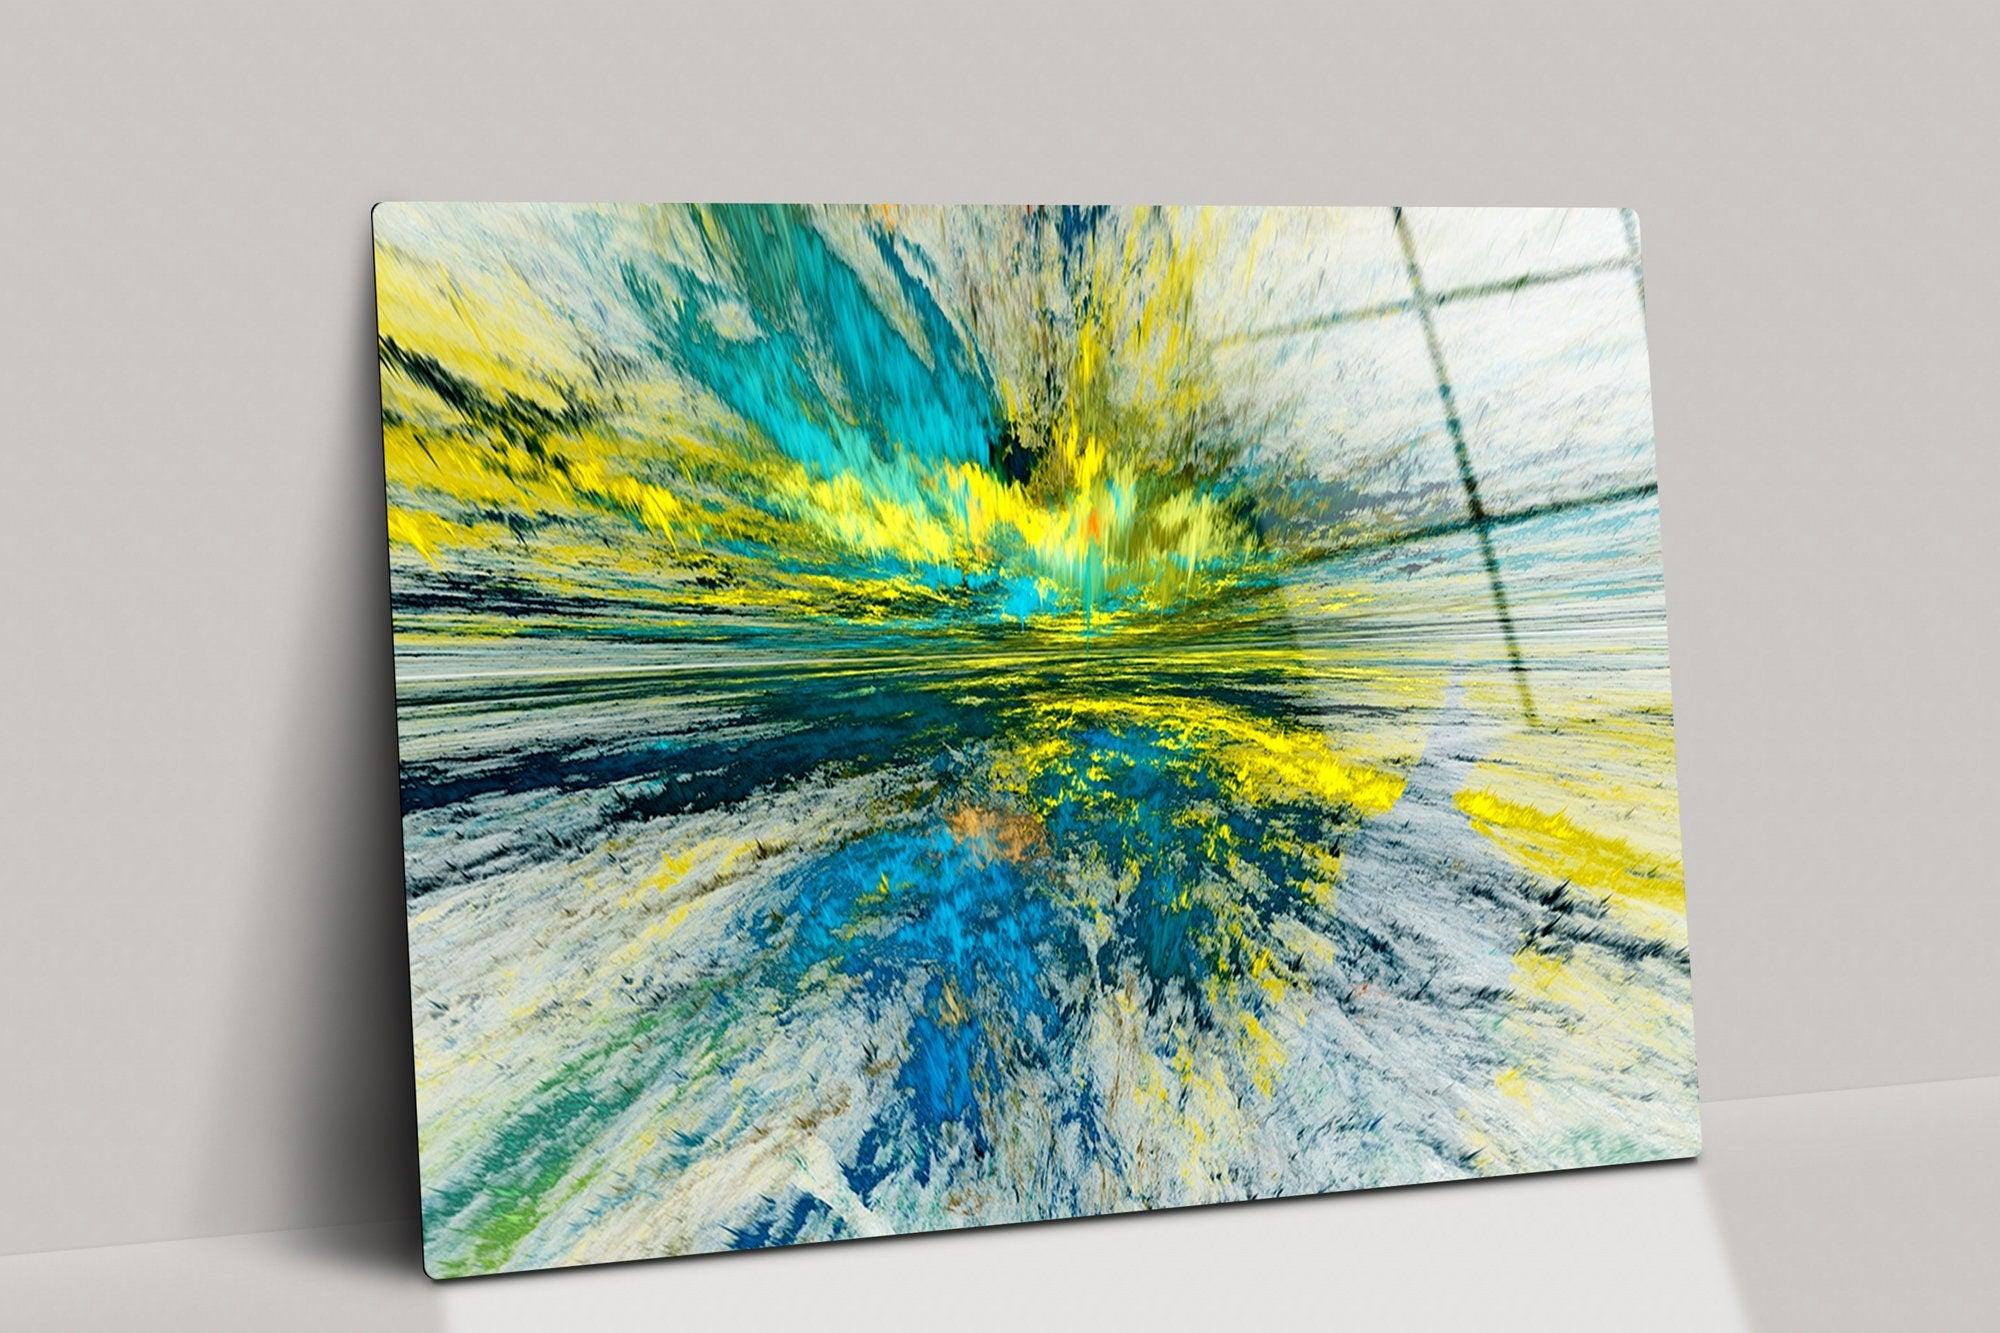 Oversized Abstract Wall Art Extra Large Modern Decor Large Original Colorful Print Texture Art Canvas Contemporary Wall Art Home Decor